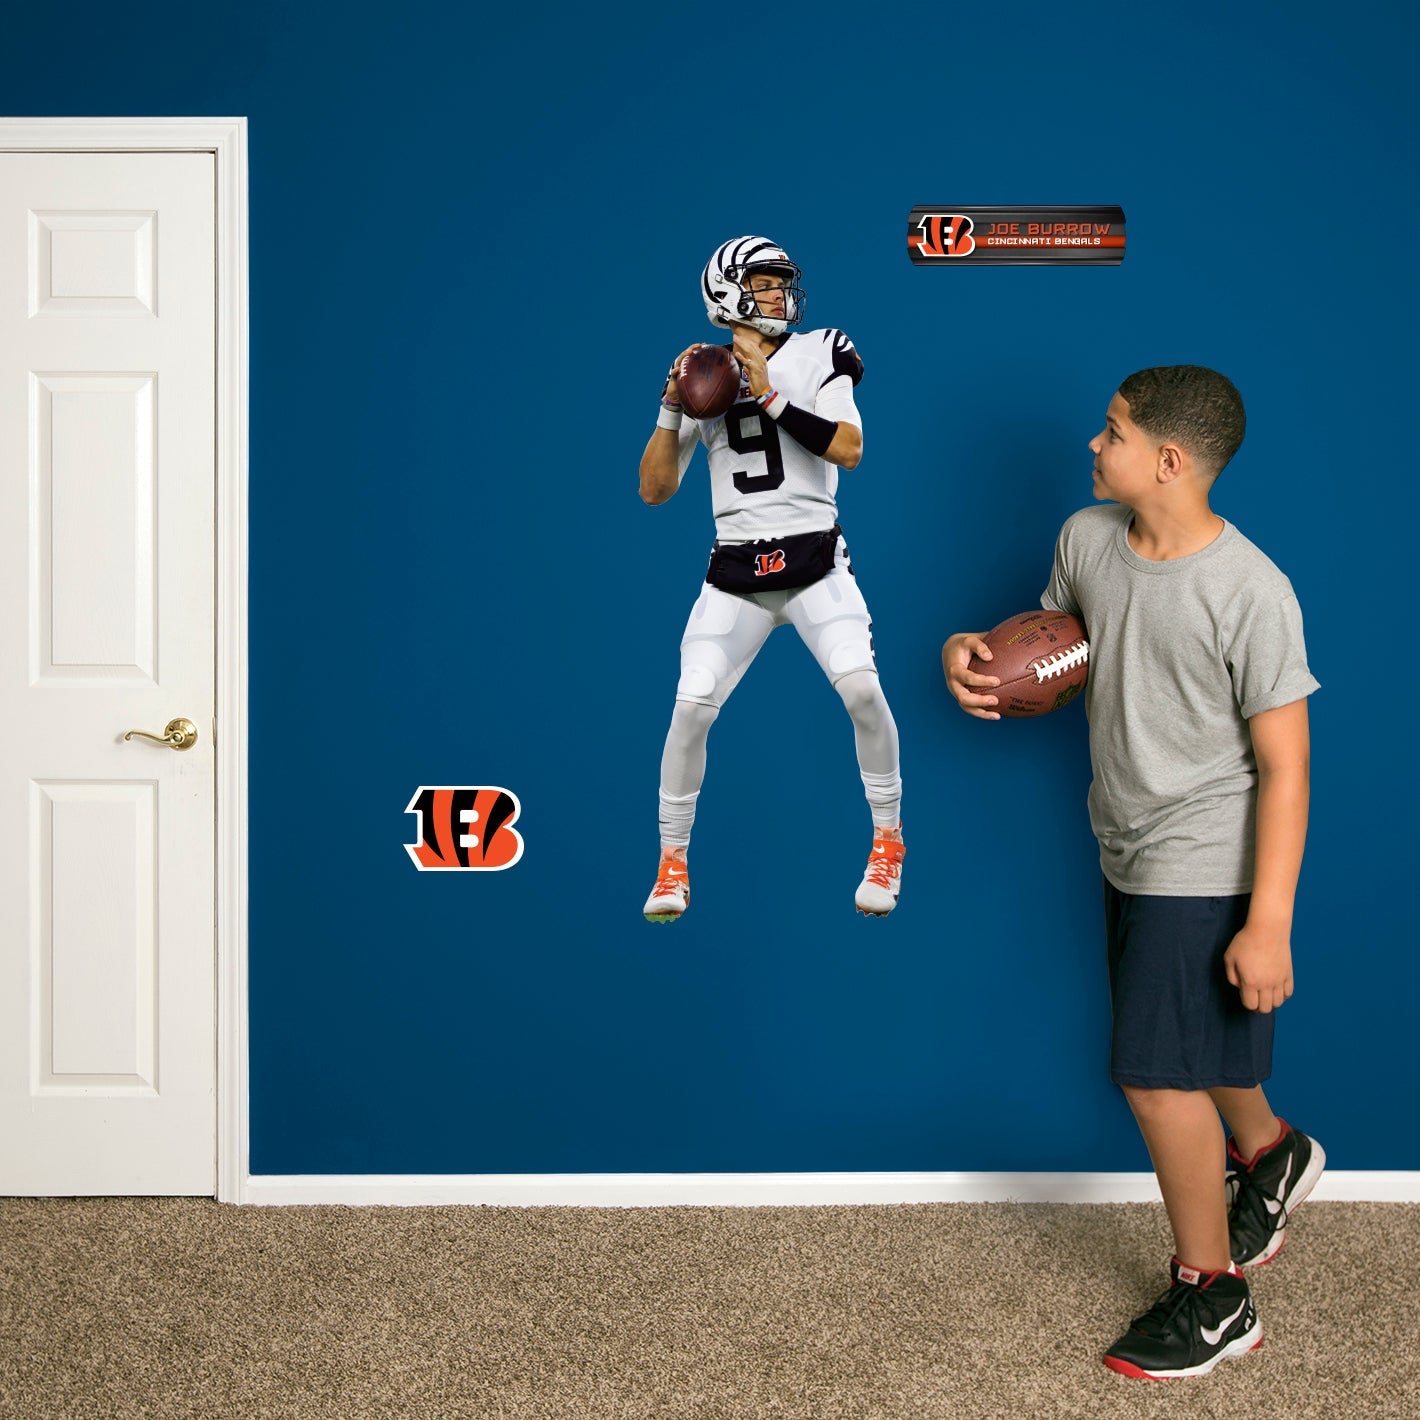 Cincinnati Bengals: Joe Burrow White Uniform - Officially Licensed NFL Removable Adhesive Decal